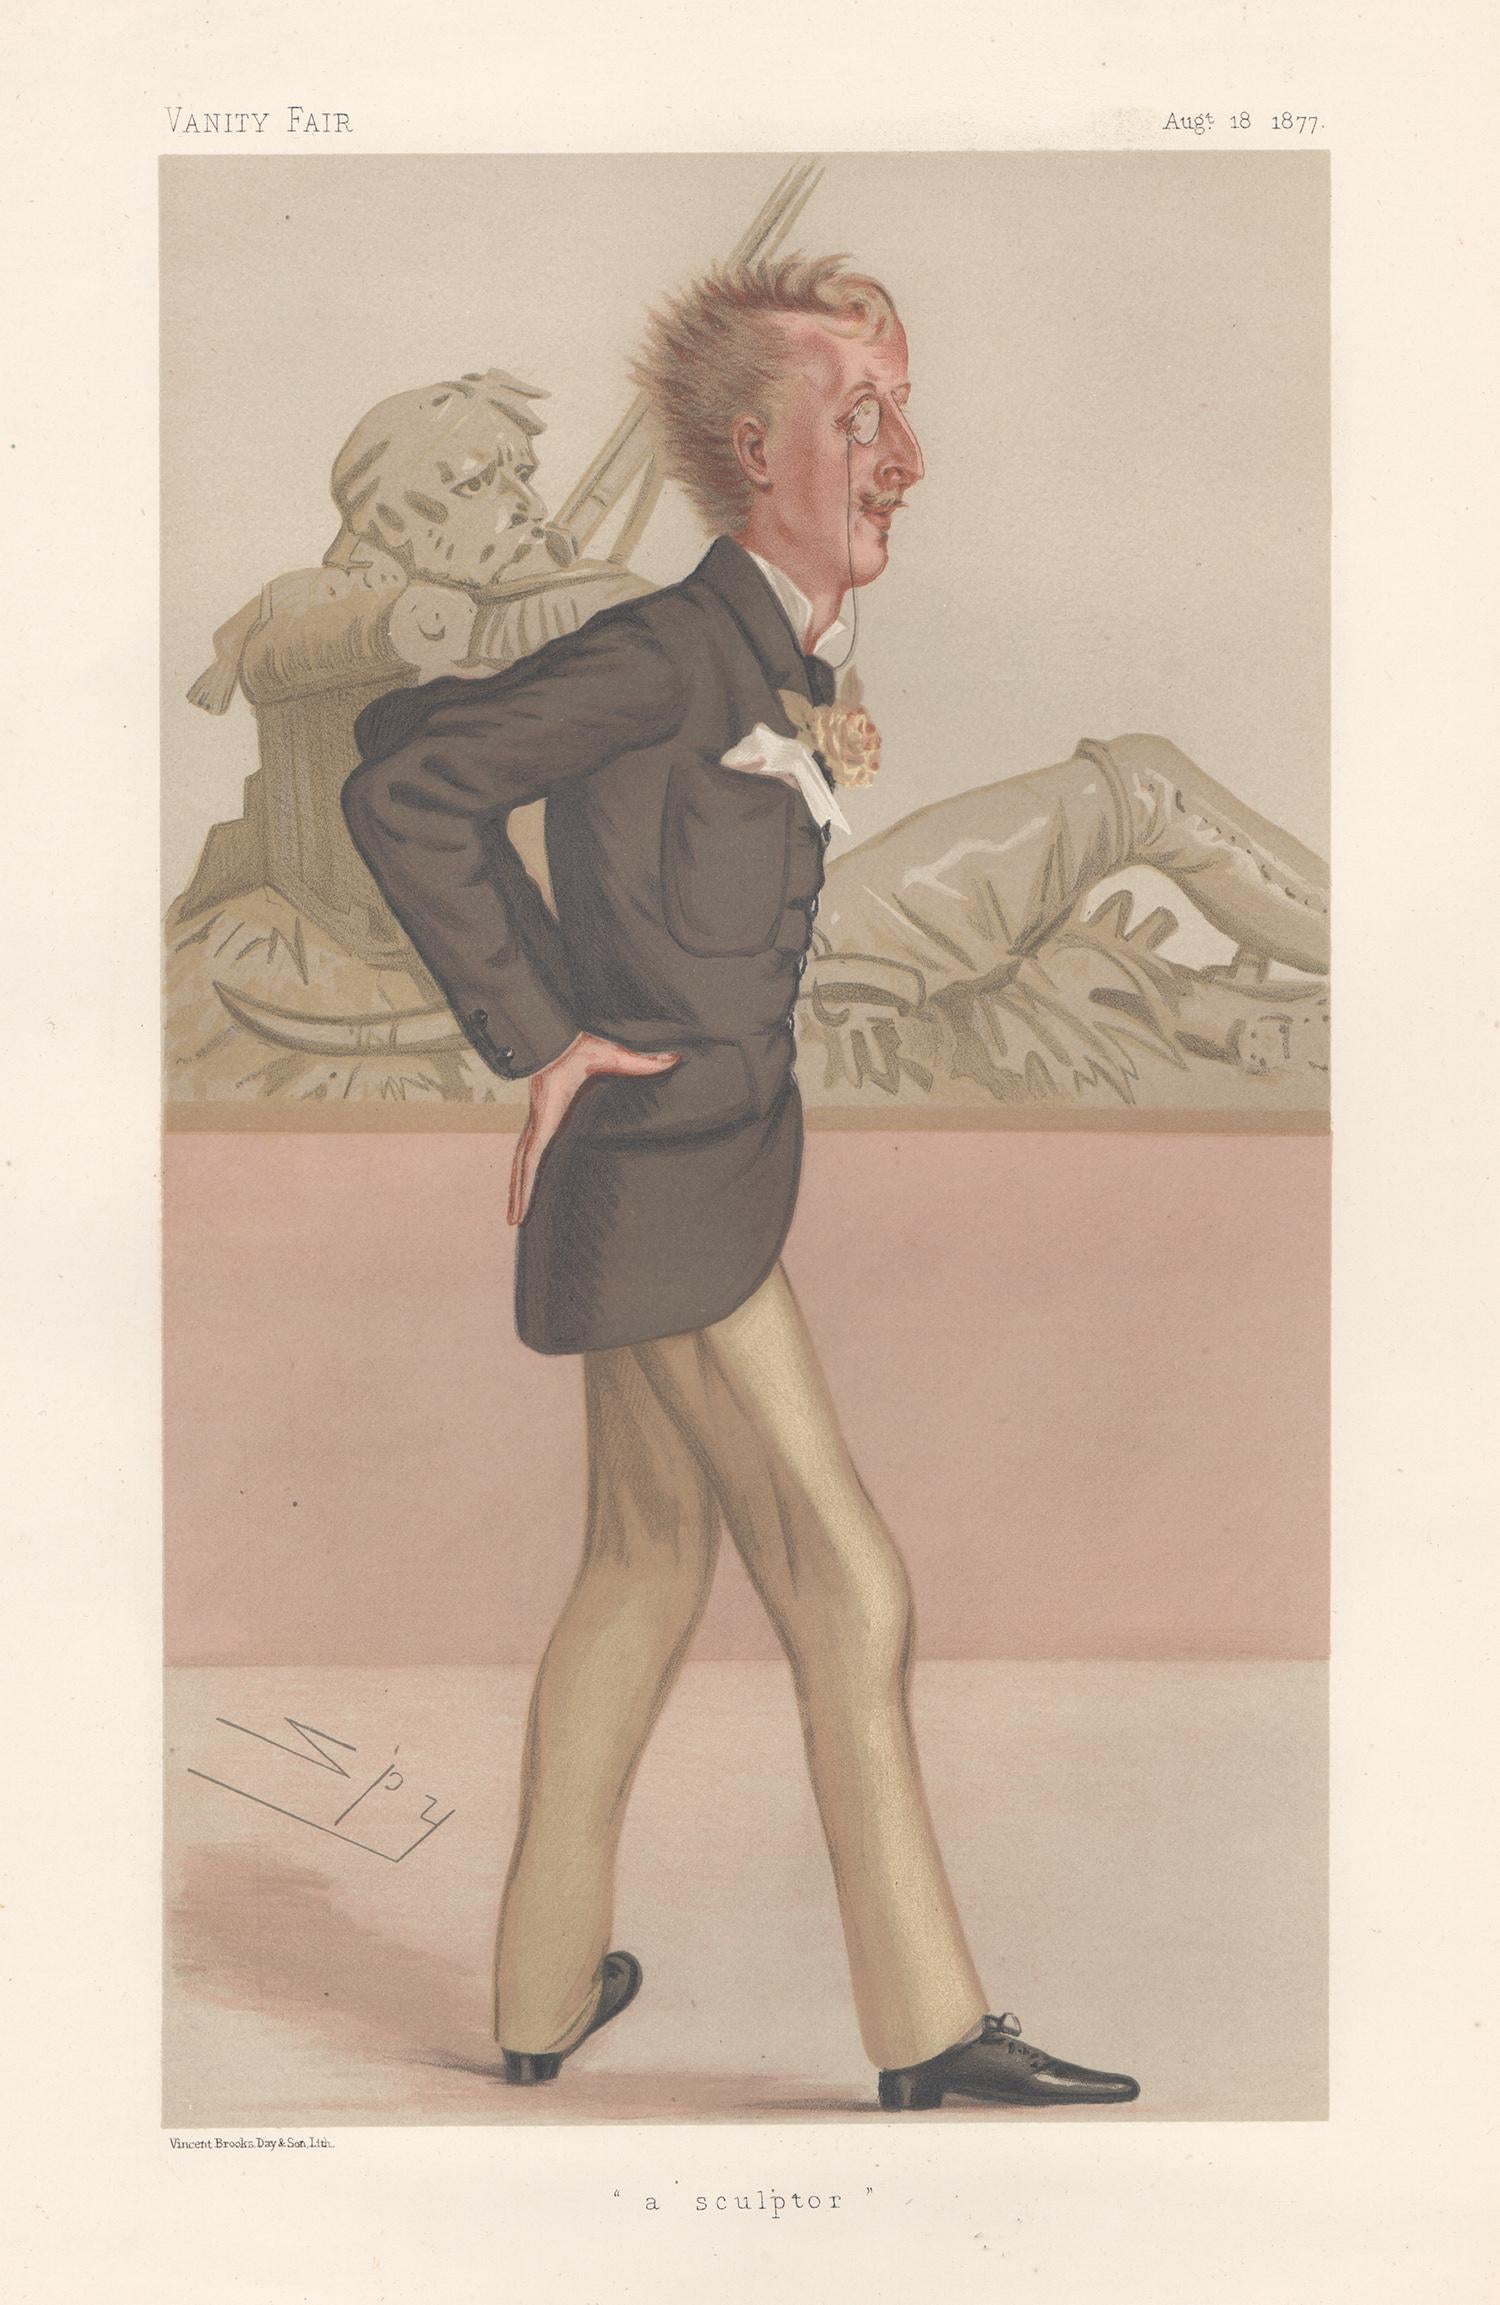 Lord Sutherland-Leveson-Gower, Vanity Fair portrait chromolithograph, 1877